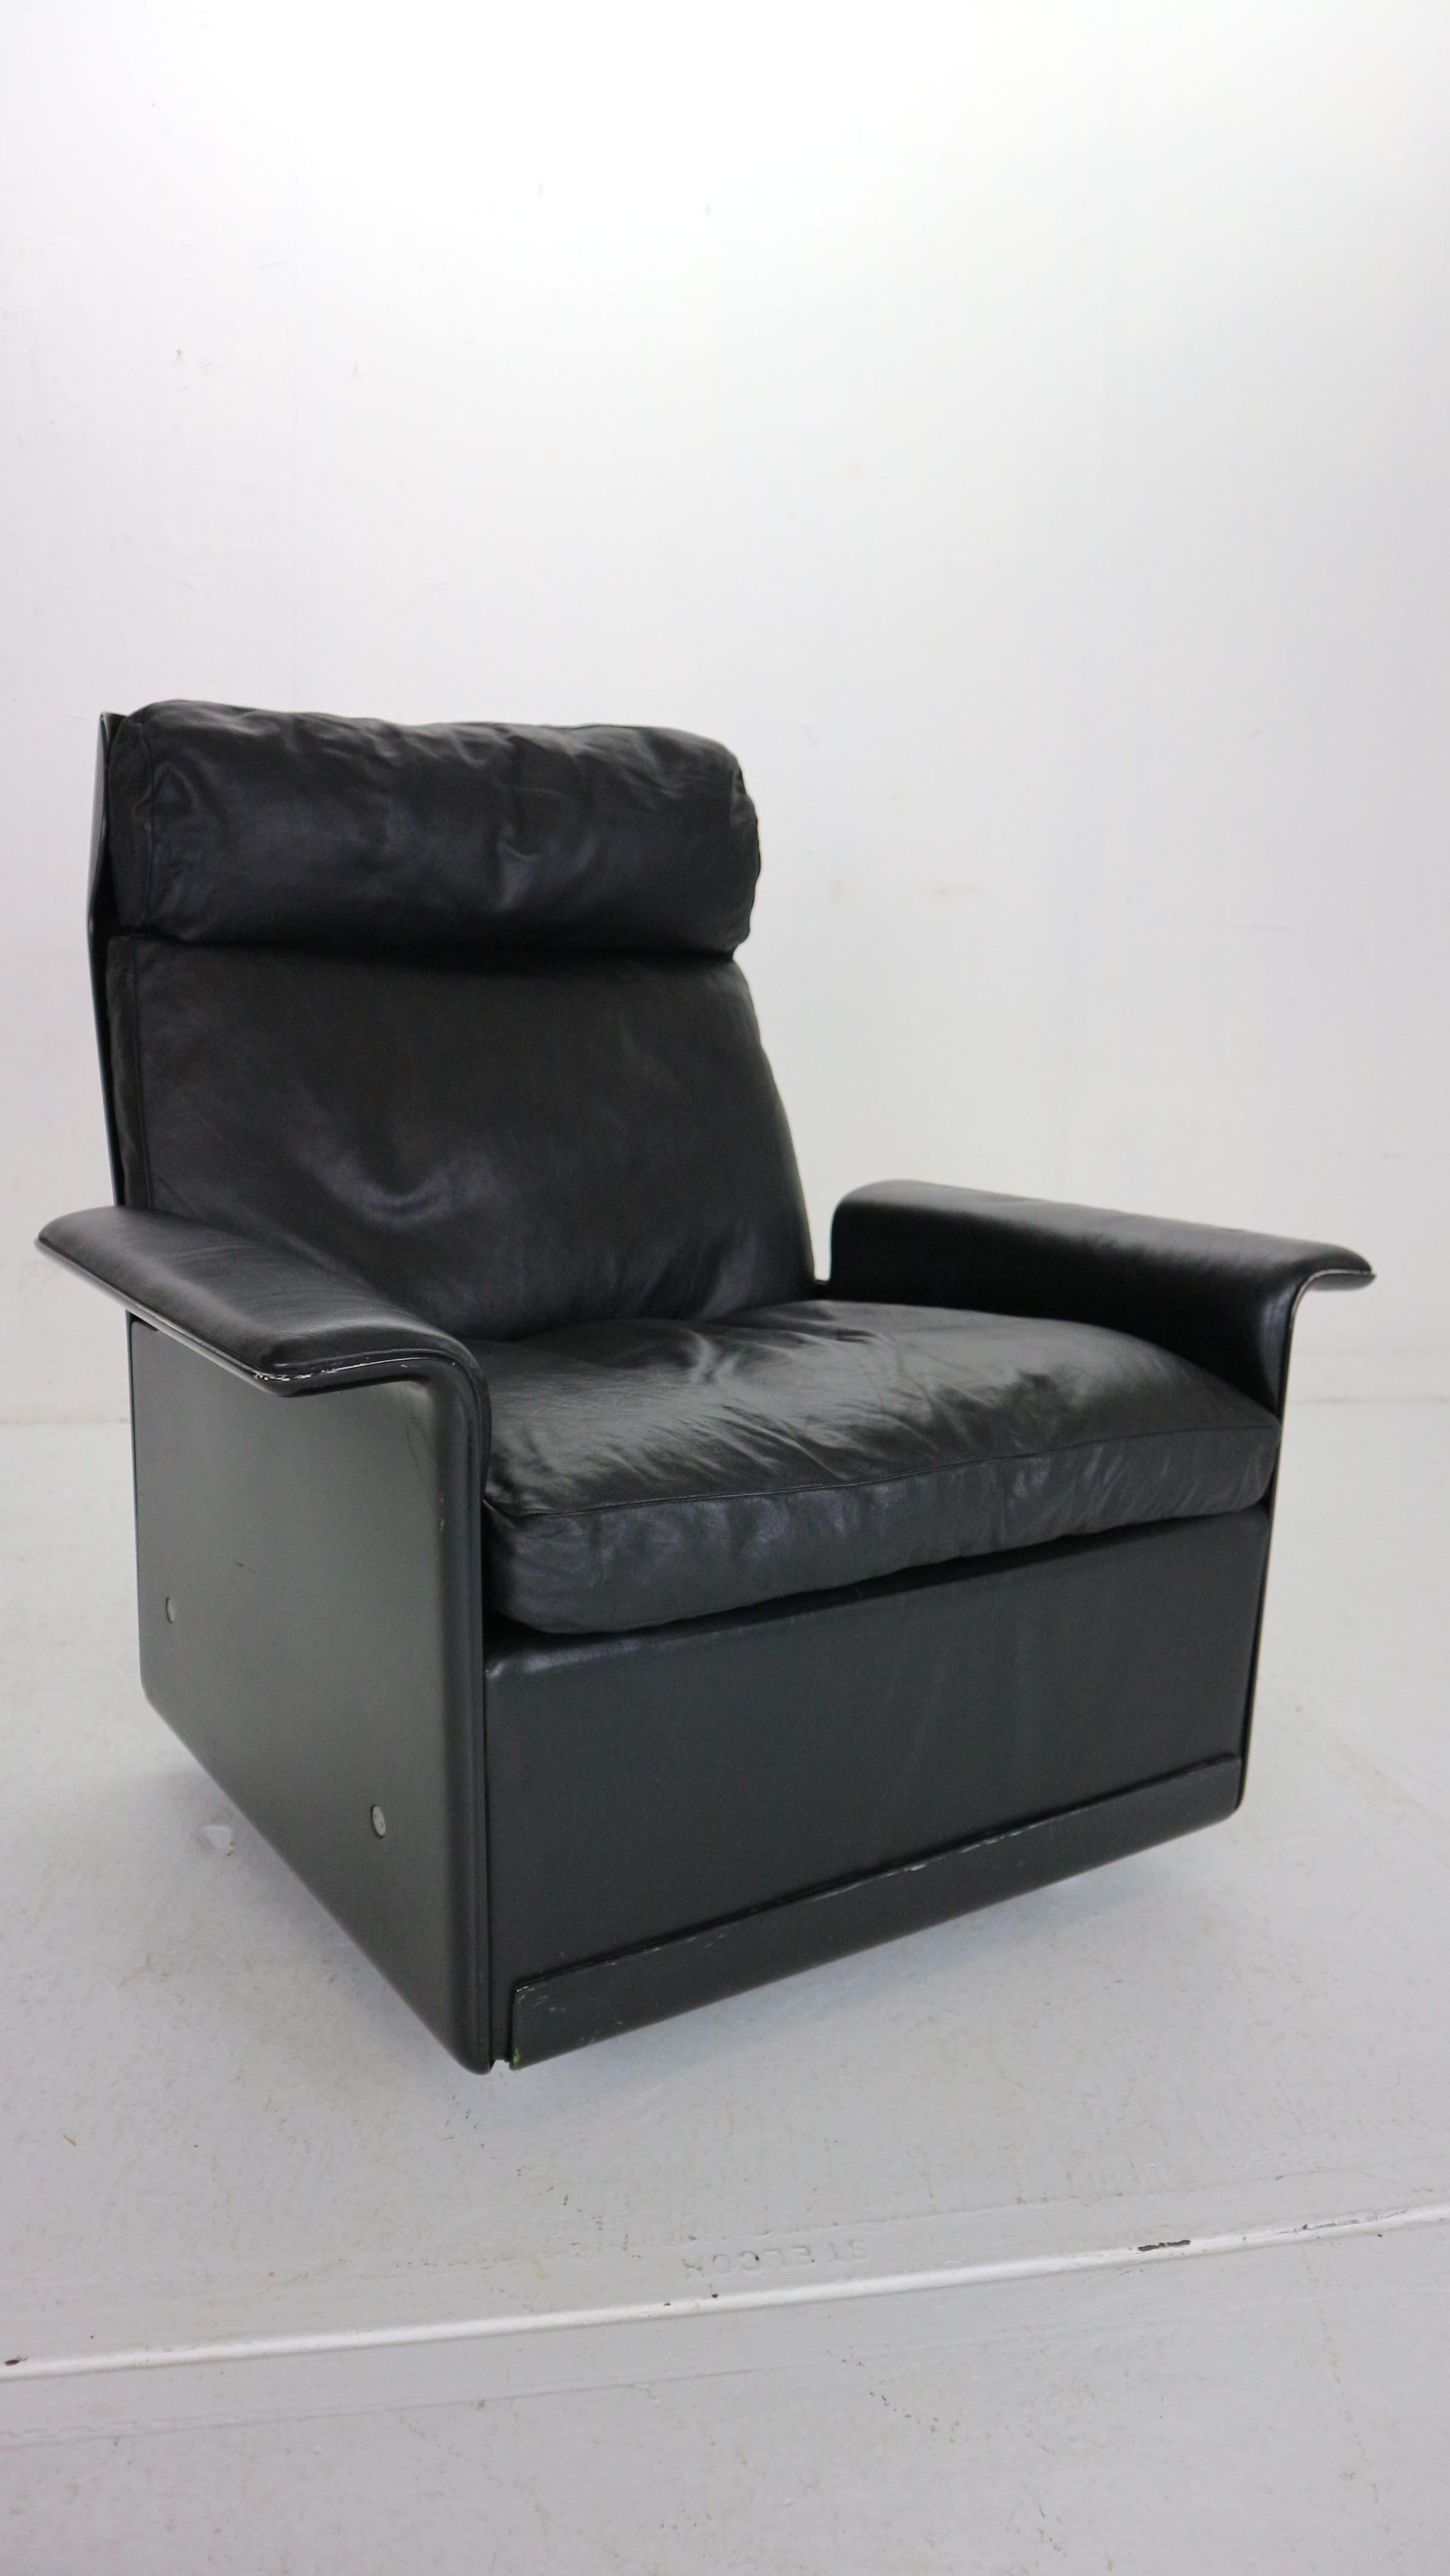 Late 20th Century Dieter Rams Set of 2 Black Leather Lounge Chairs Model-620 for Vitsœ, 1970s